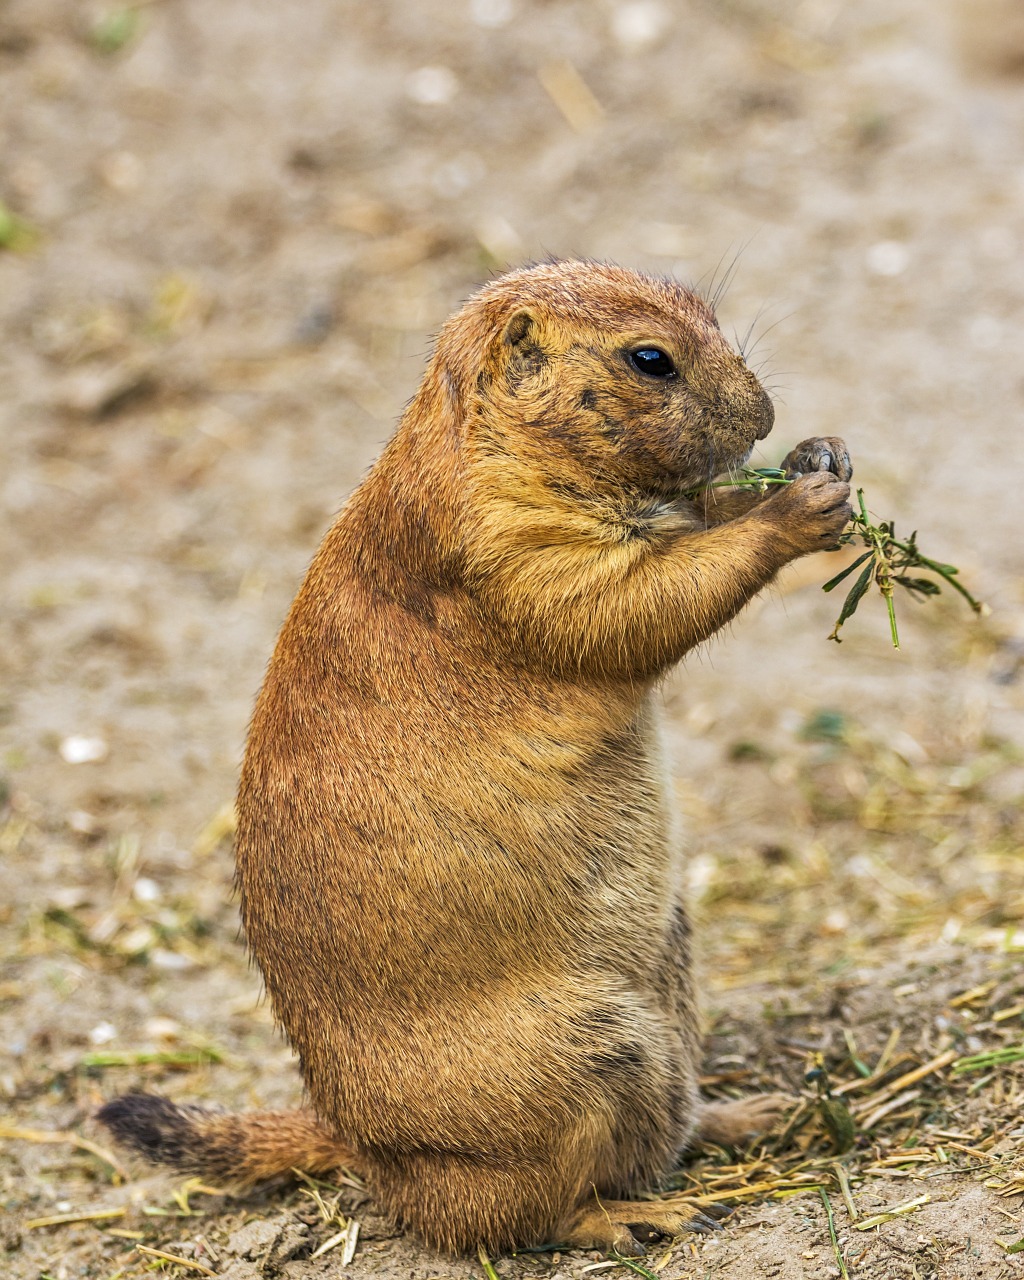 A prairie dog sitting up eating a piece of vegetation in its paws